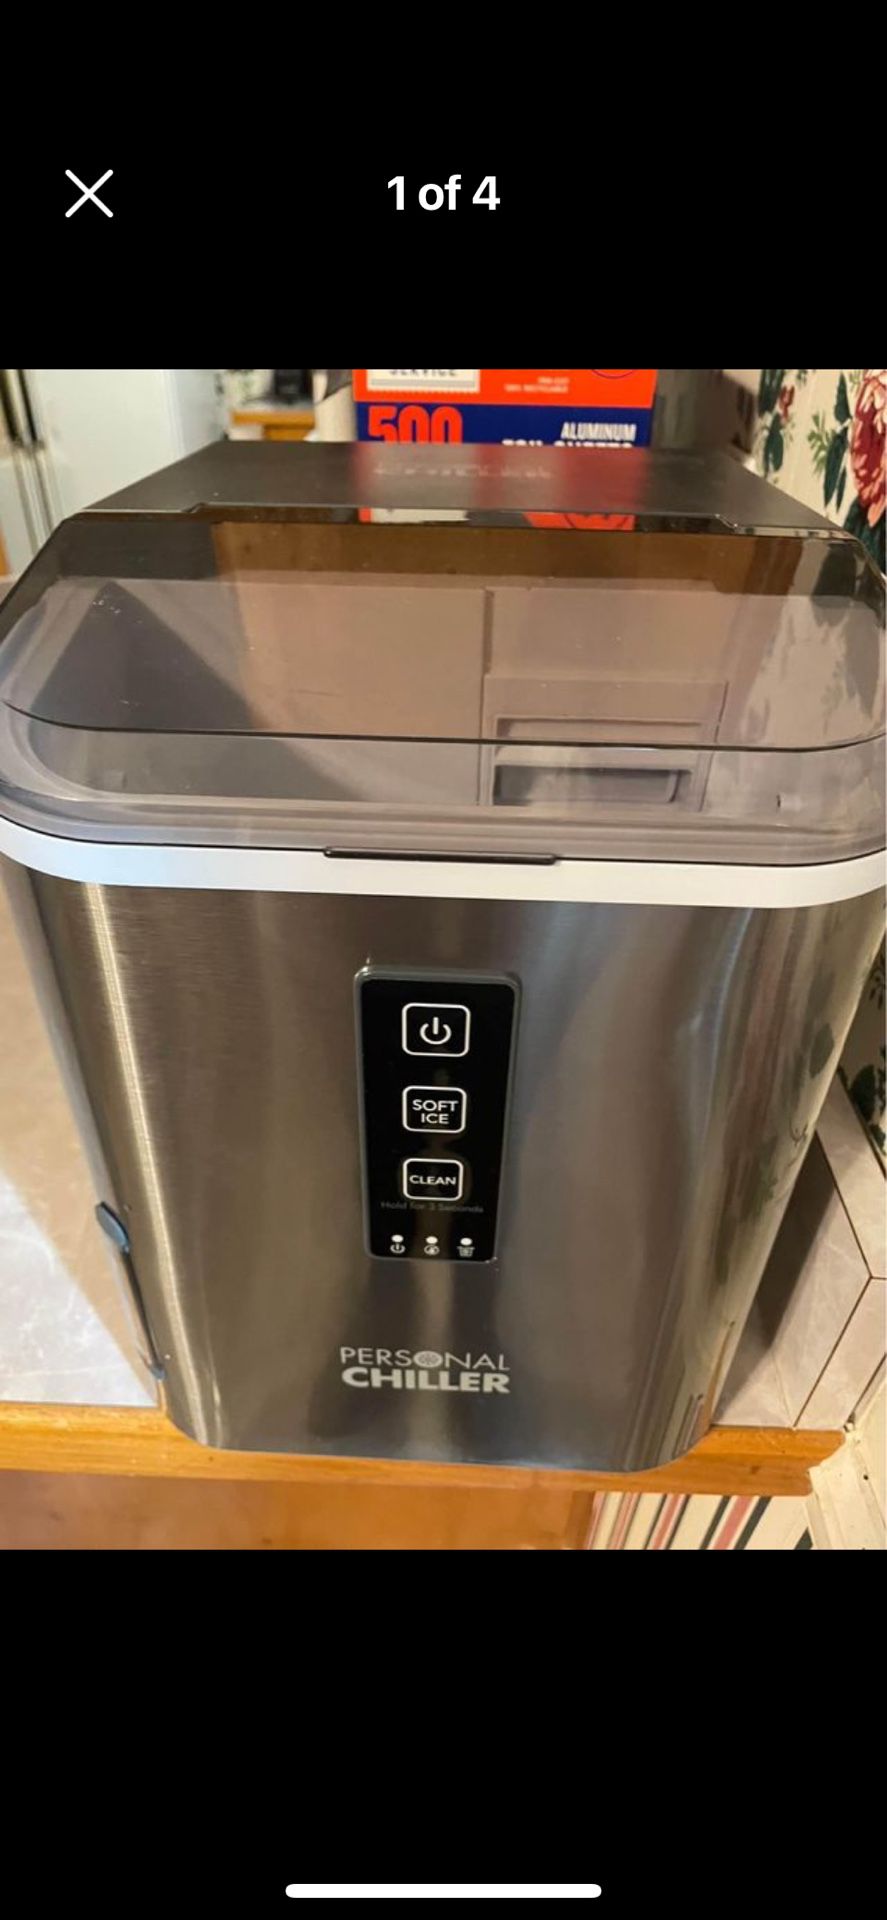 Personal Chiller Soft Nugget Ice Machine